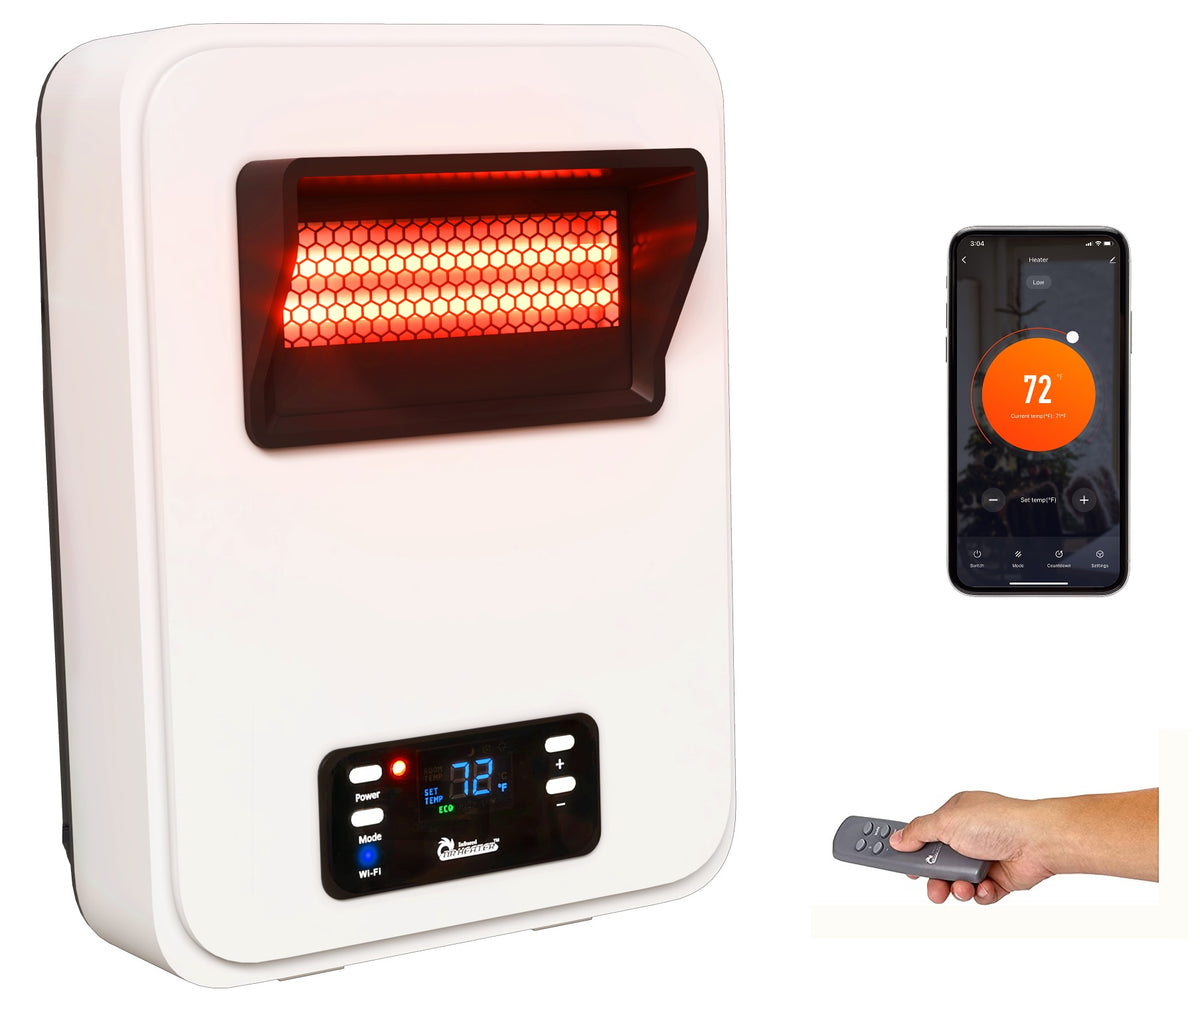 DR-908W - Infrared Heater with WiFi - Wall Heater - Electric Heaters f